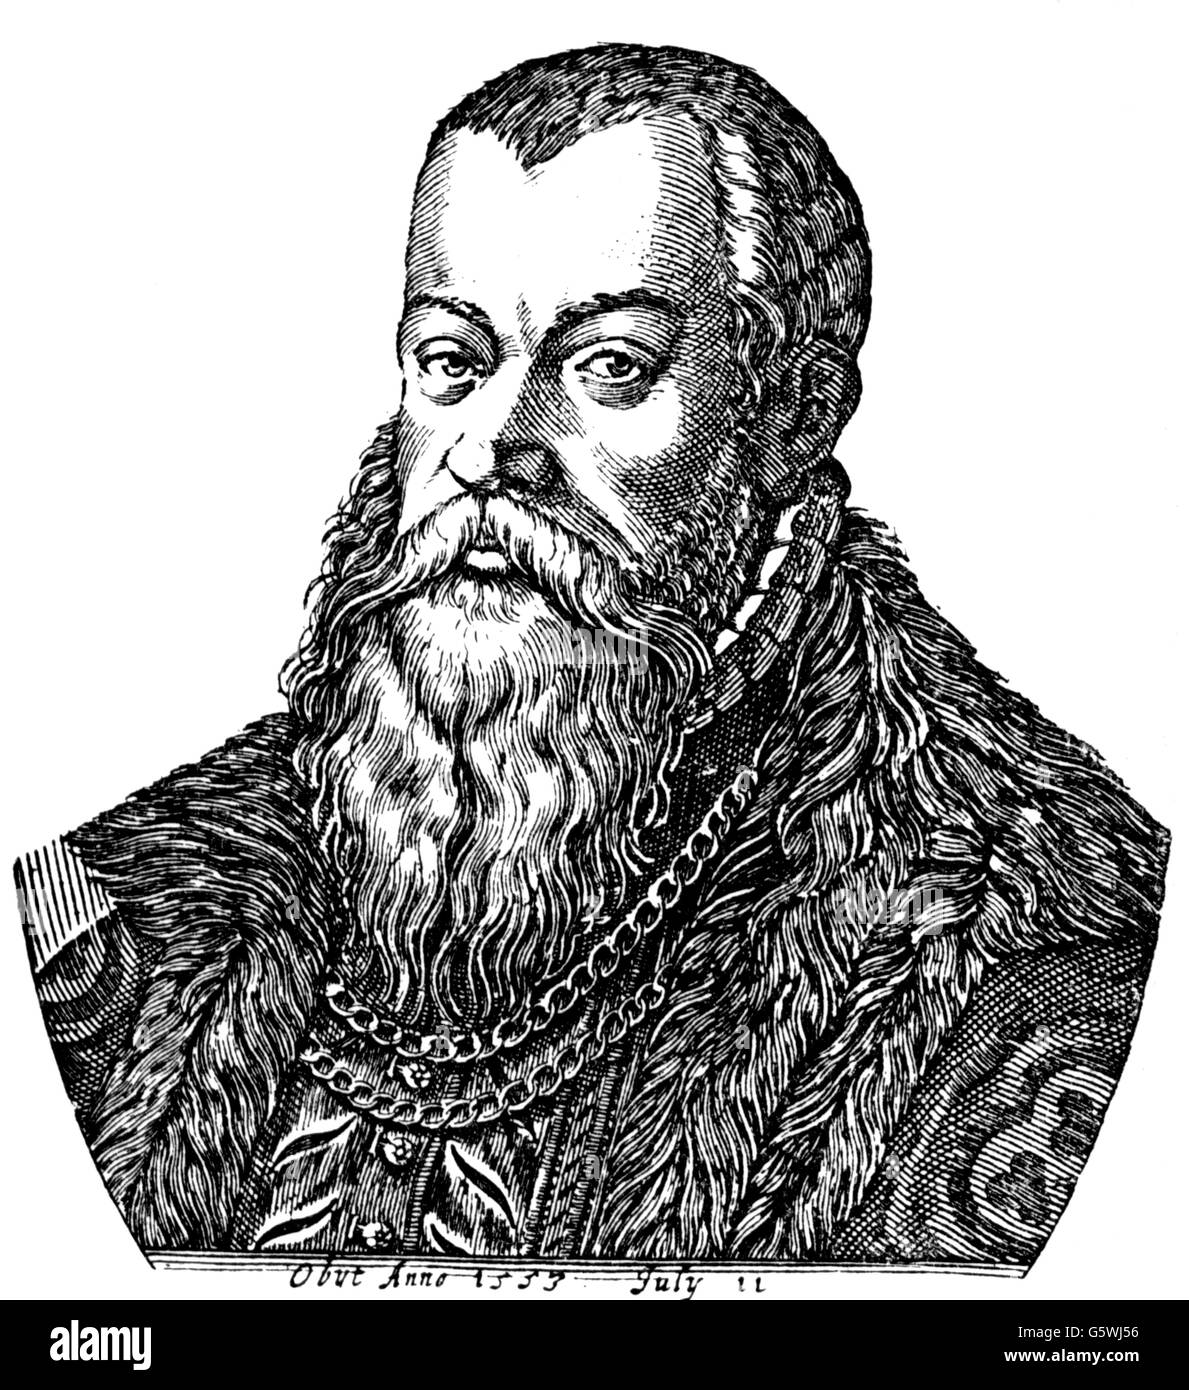 Maurice, 21.3.1521 - 11.7.1553, Prince-Elector of Saxony 18.8.1547 - 11.7.1553, portrait, wood engraving, 19th century, Stock Photo